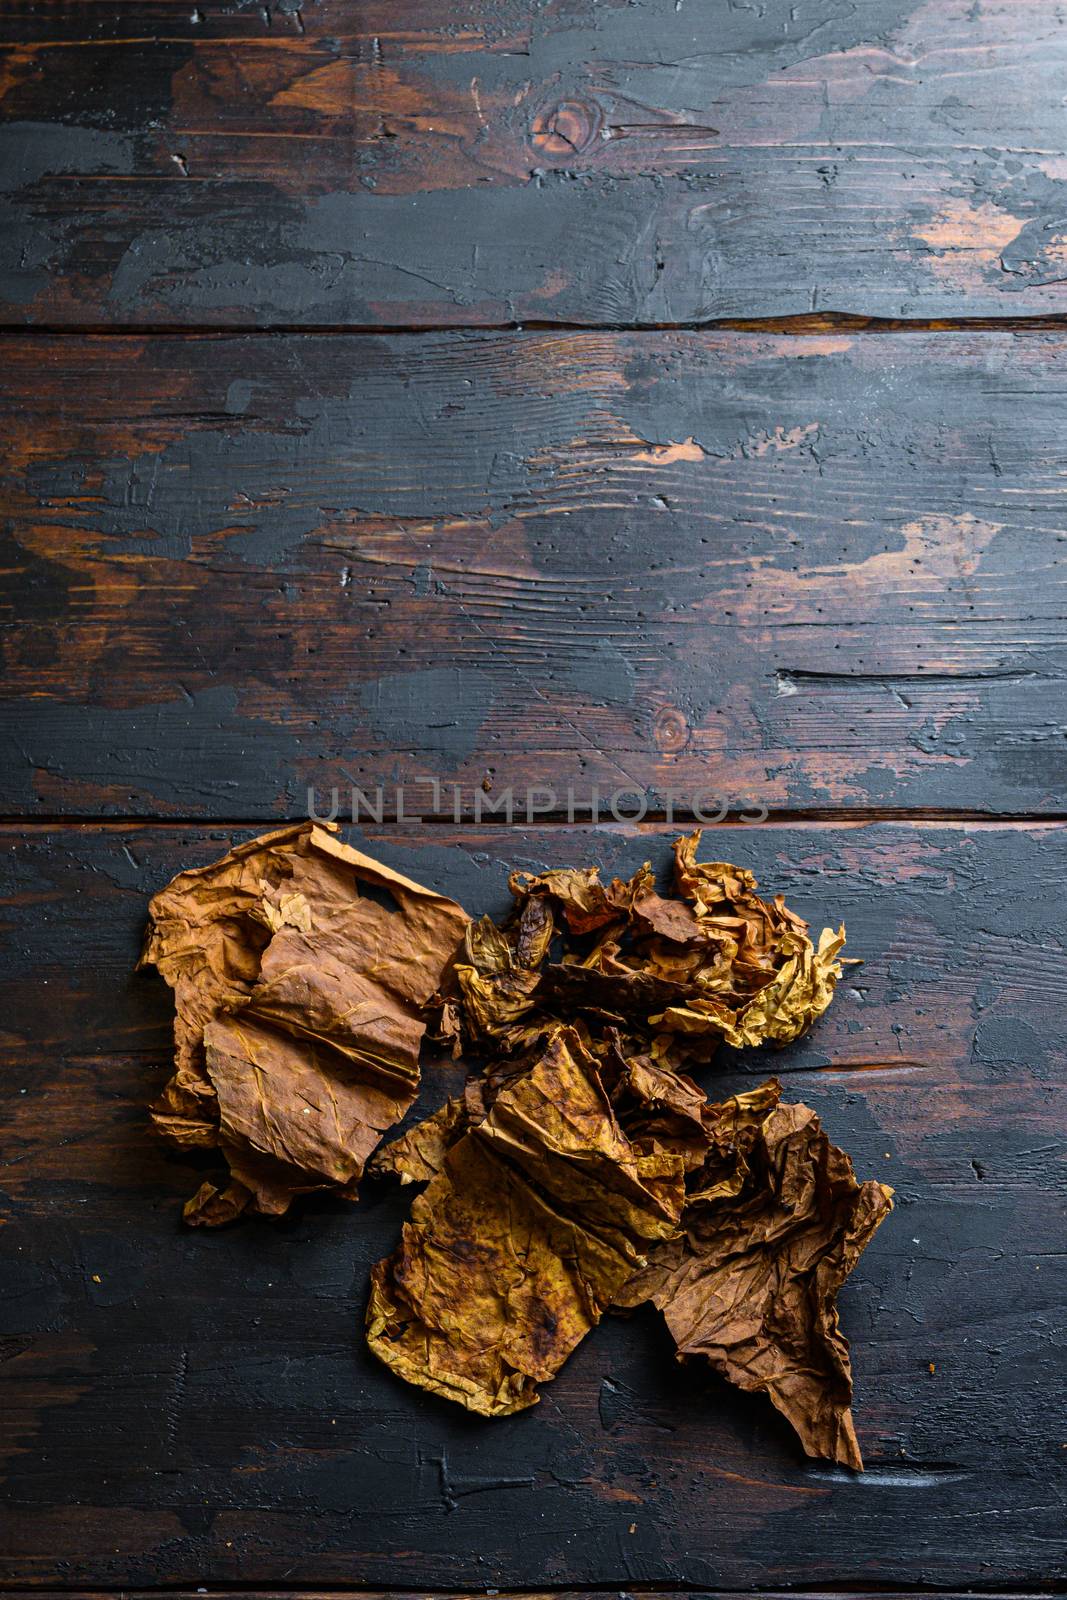 dry leafs tobacco Nicotiana tabacum and tobacco leaves on old wood planks table dark top view space for text.